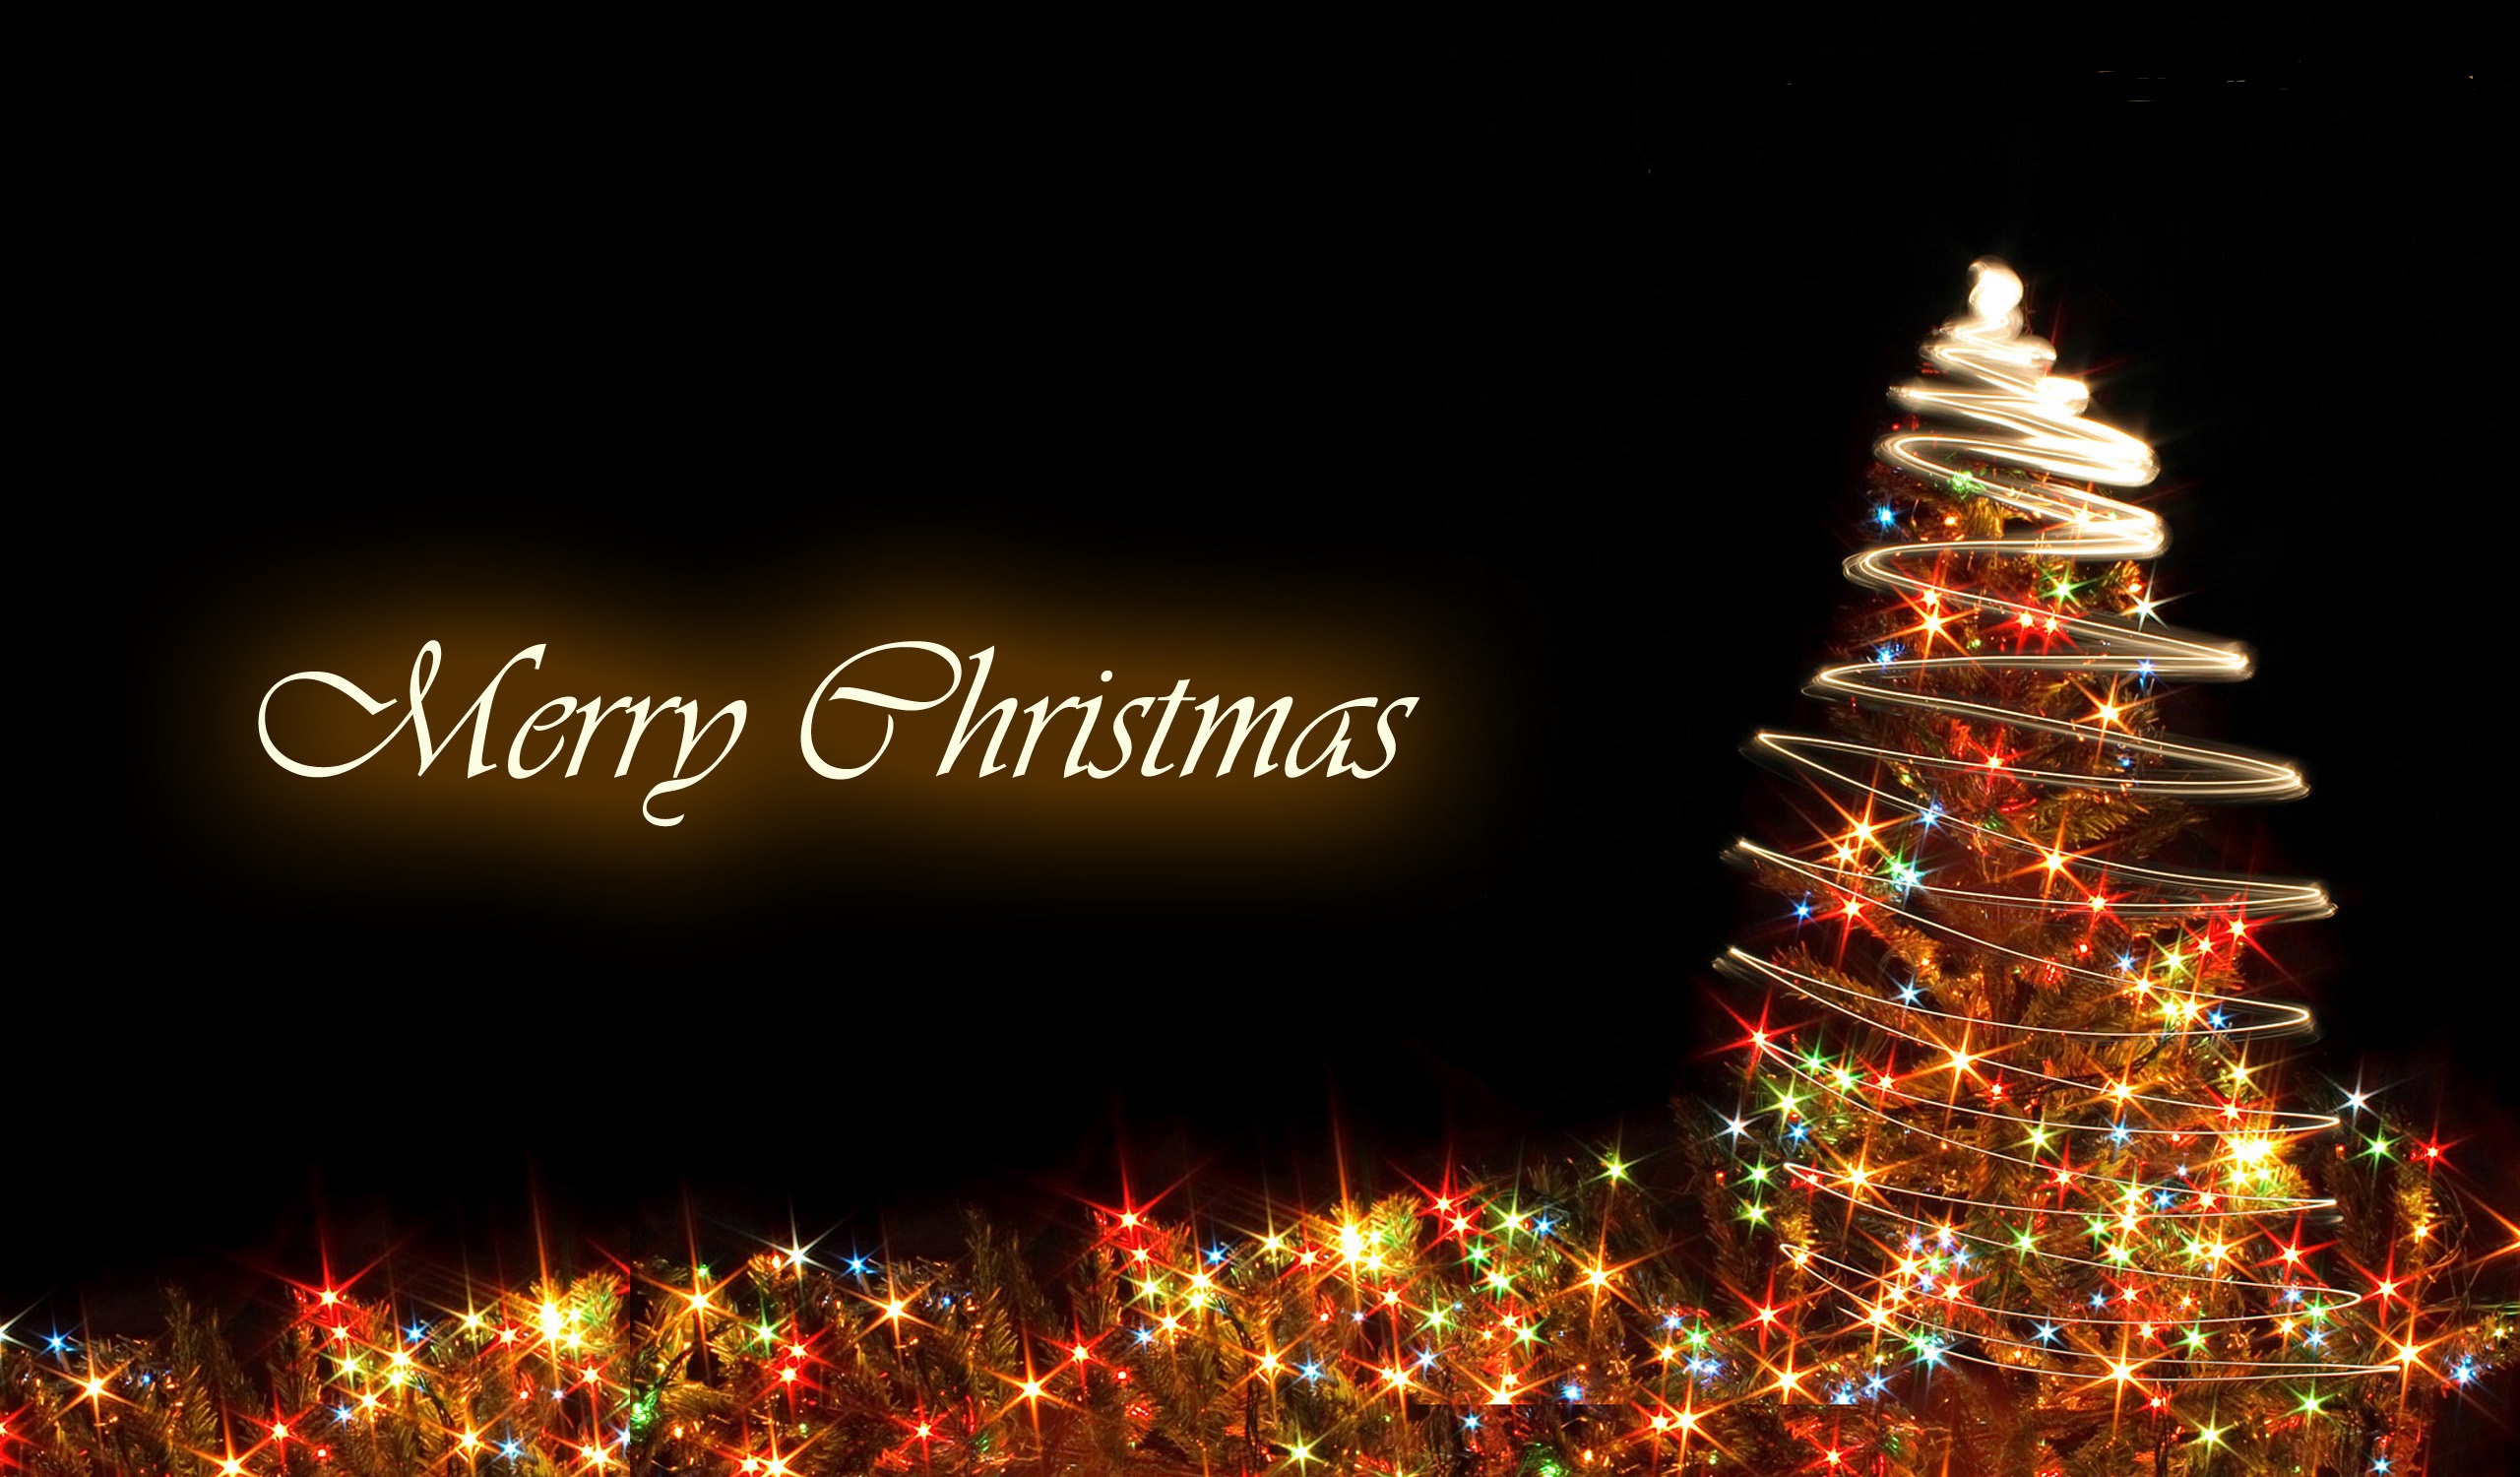 Merry Christmas Images Hd 2022 Free Download : Free Download Merry ...